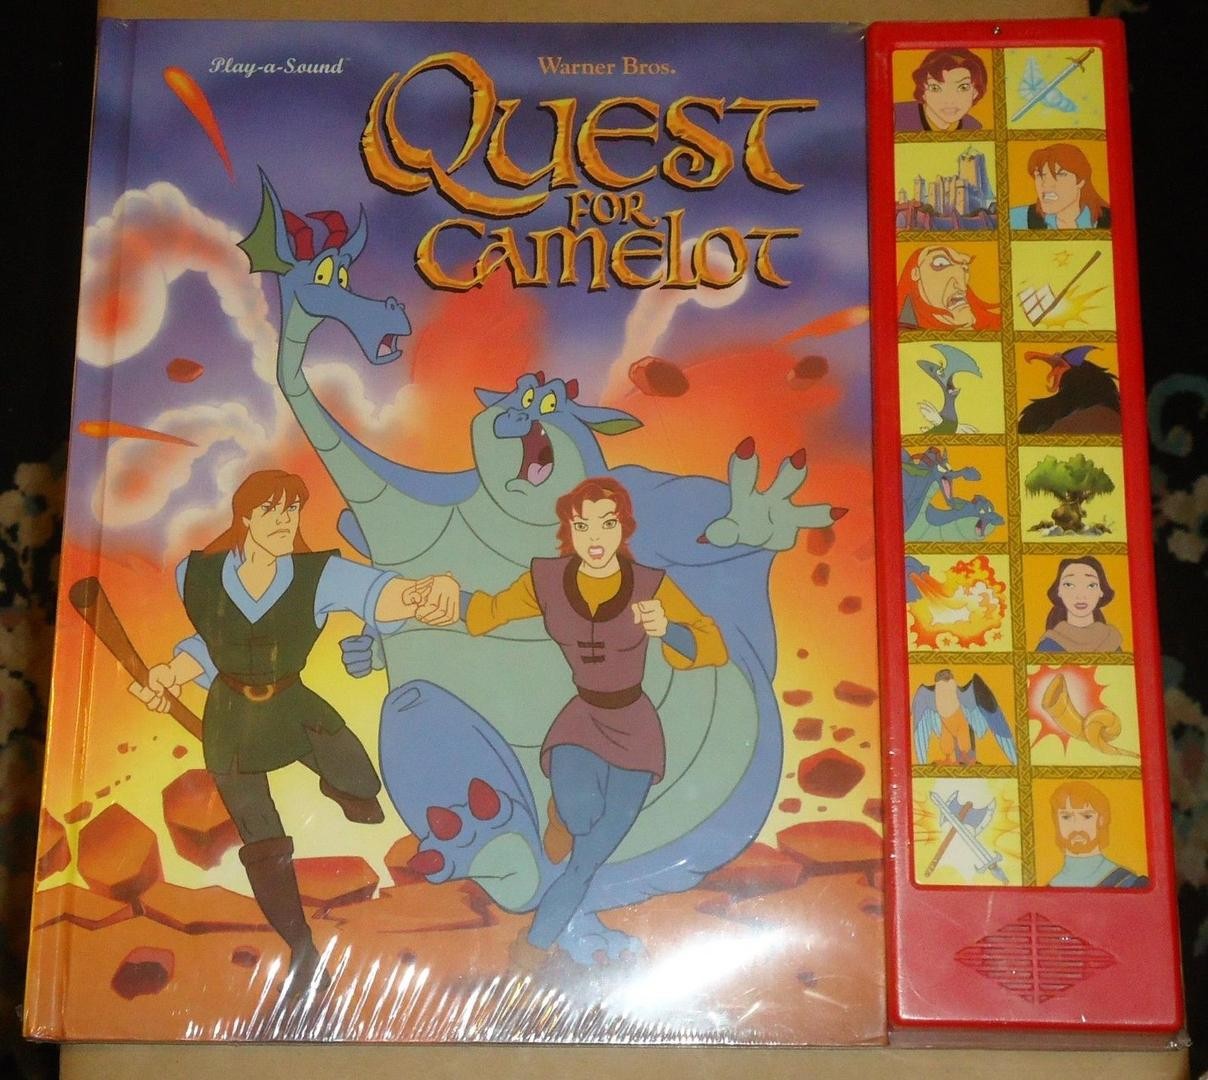 Quest for Camelot: Play-a-Sound | Warner Bros. Entertainment Wiki | Fandom